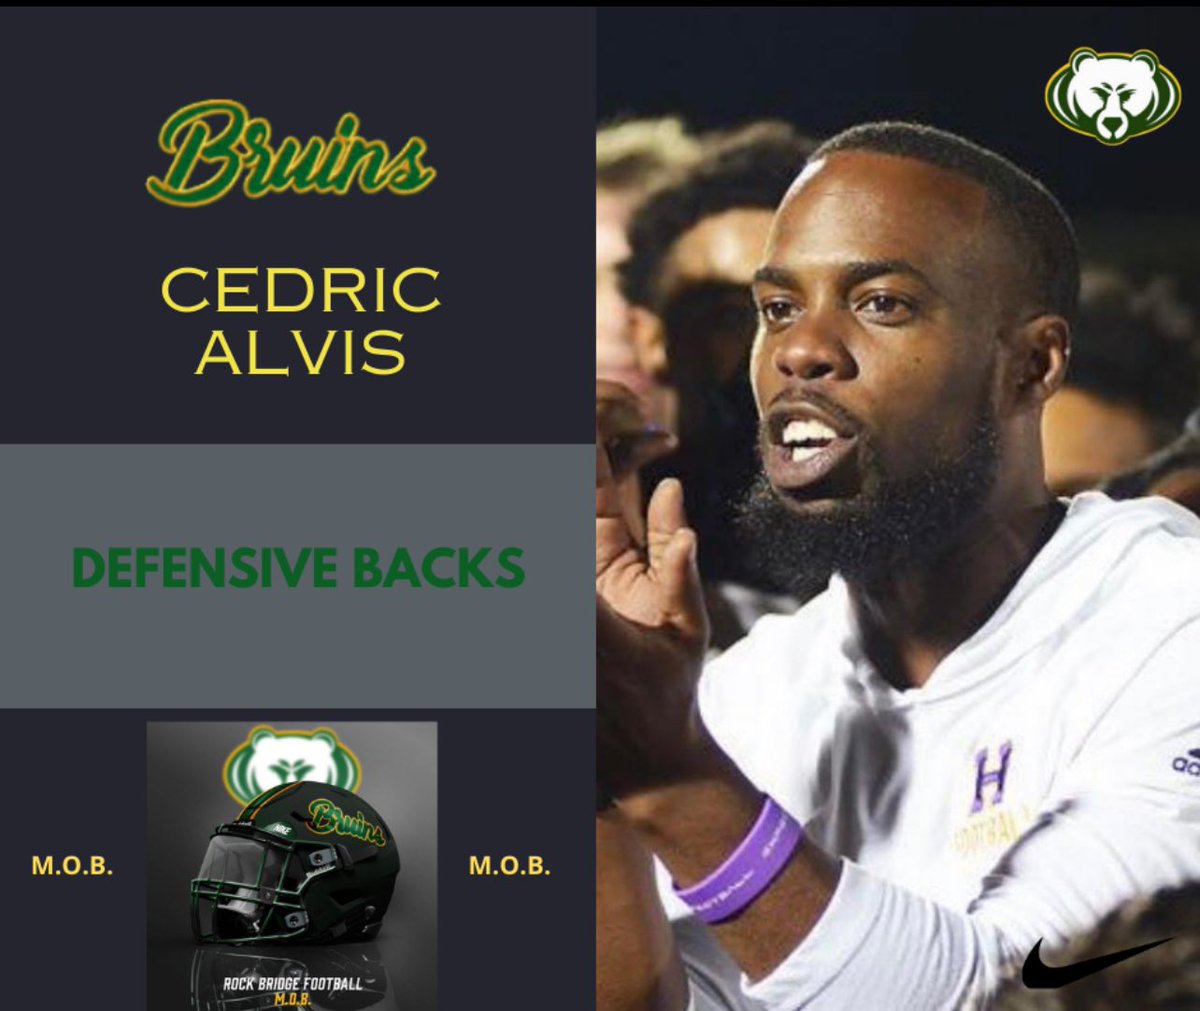 M. O. B. Welcome to the program coach Alvis! Fired up to have you.